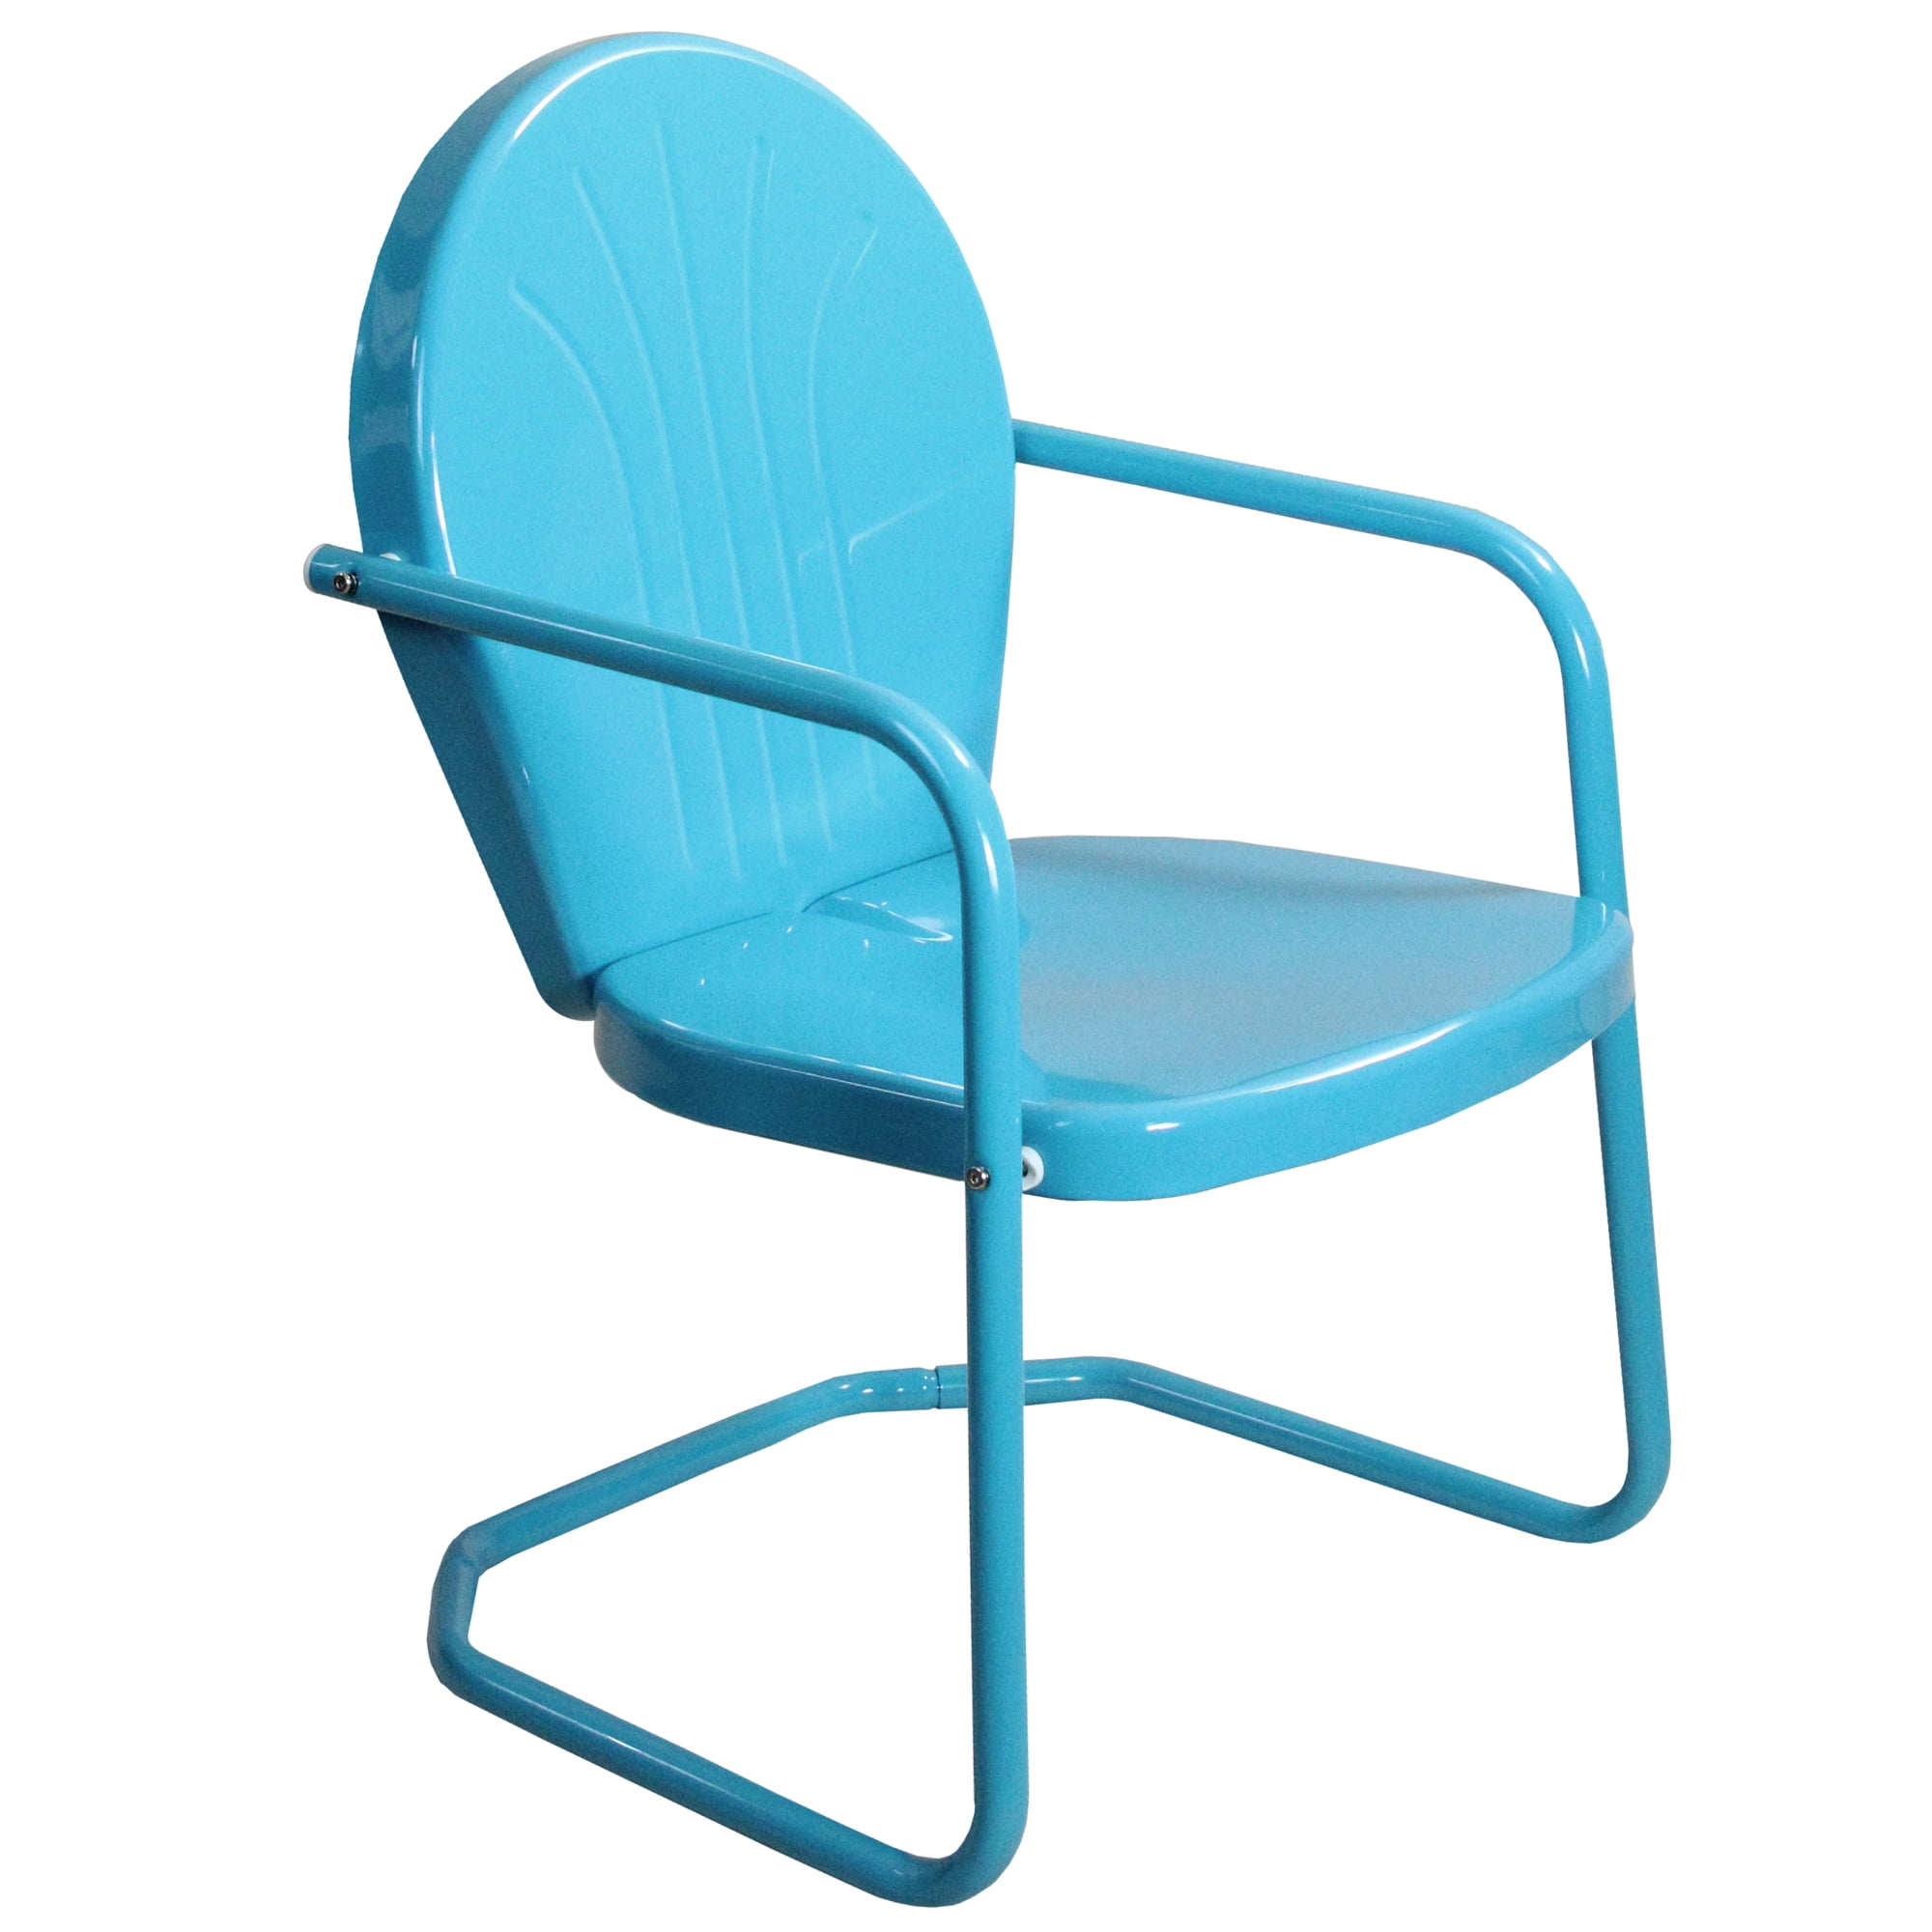 Northlight 34-Inch Outdoor Retro Tulip Armchair Turquoise Blue